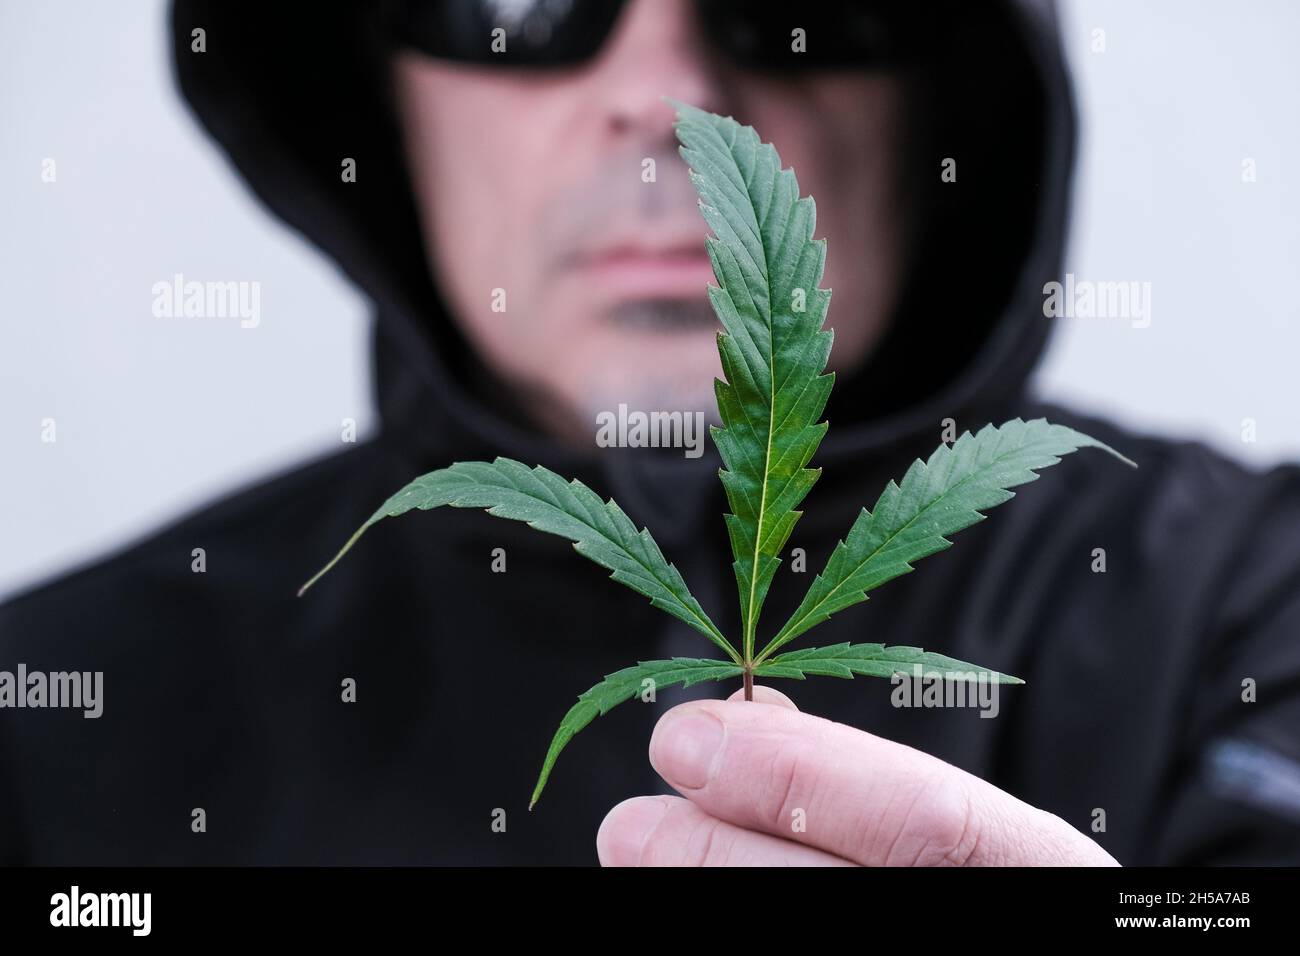 Cannabis leaf in male hands. Hemp leaf on the background of blurred face of man. The topic of problems related to crime and violation of the law. Stock Photo